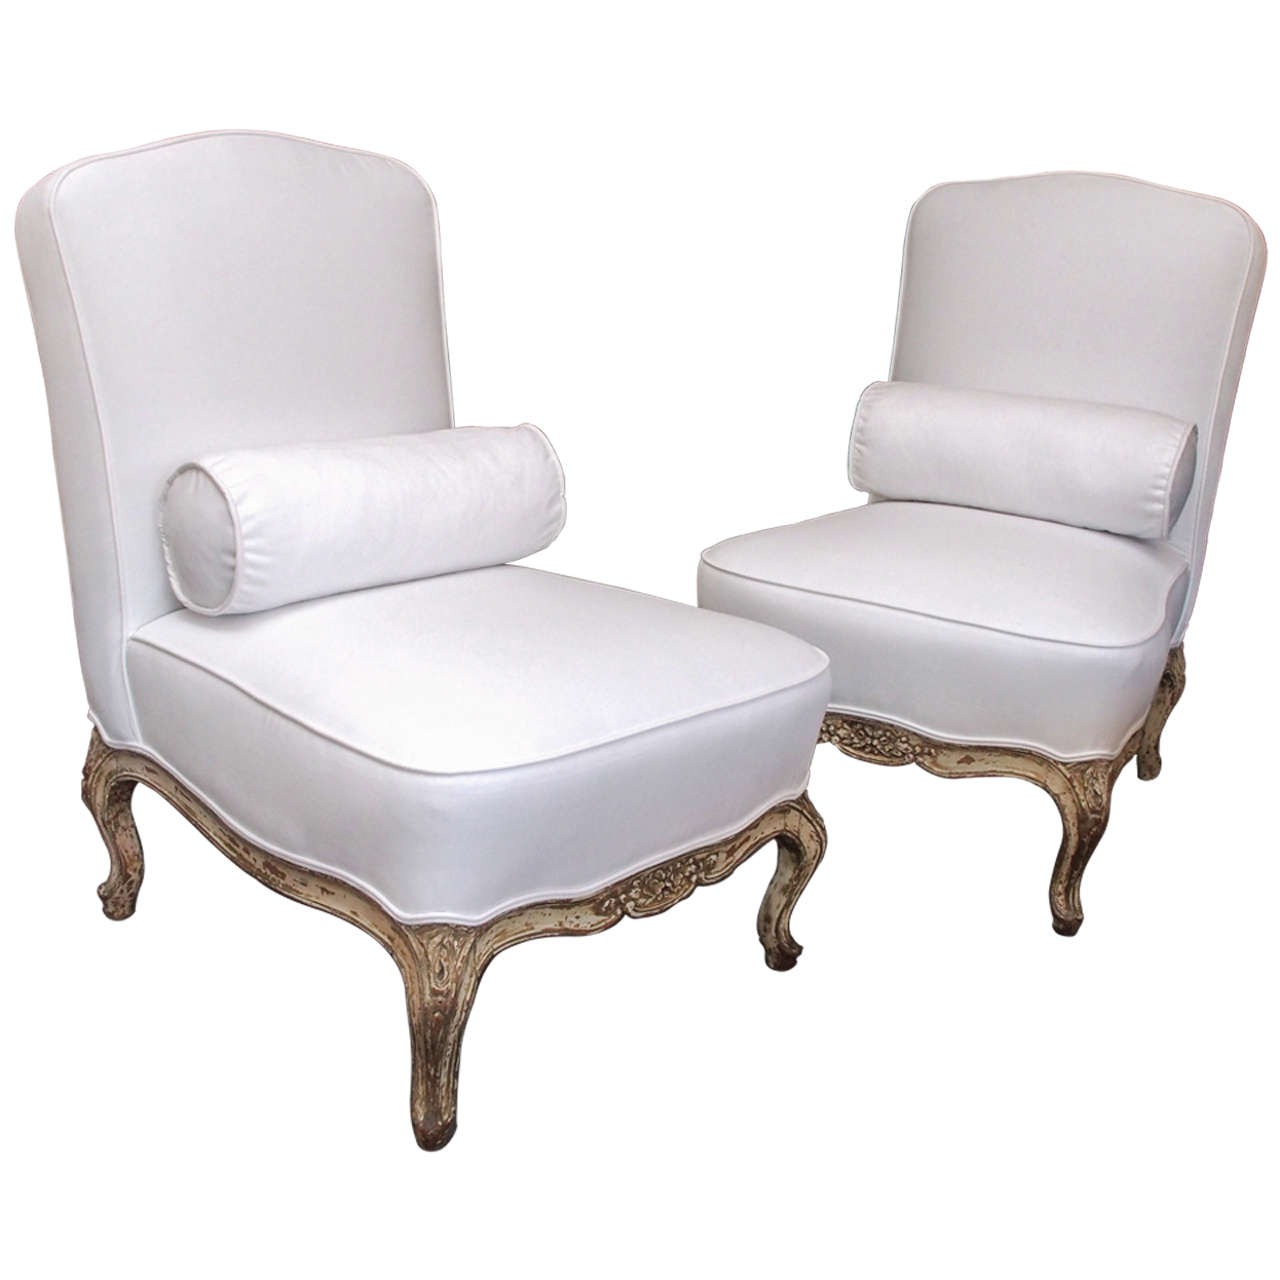 1930's Pair of French Slipper Chairs